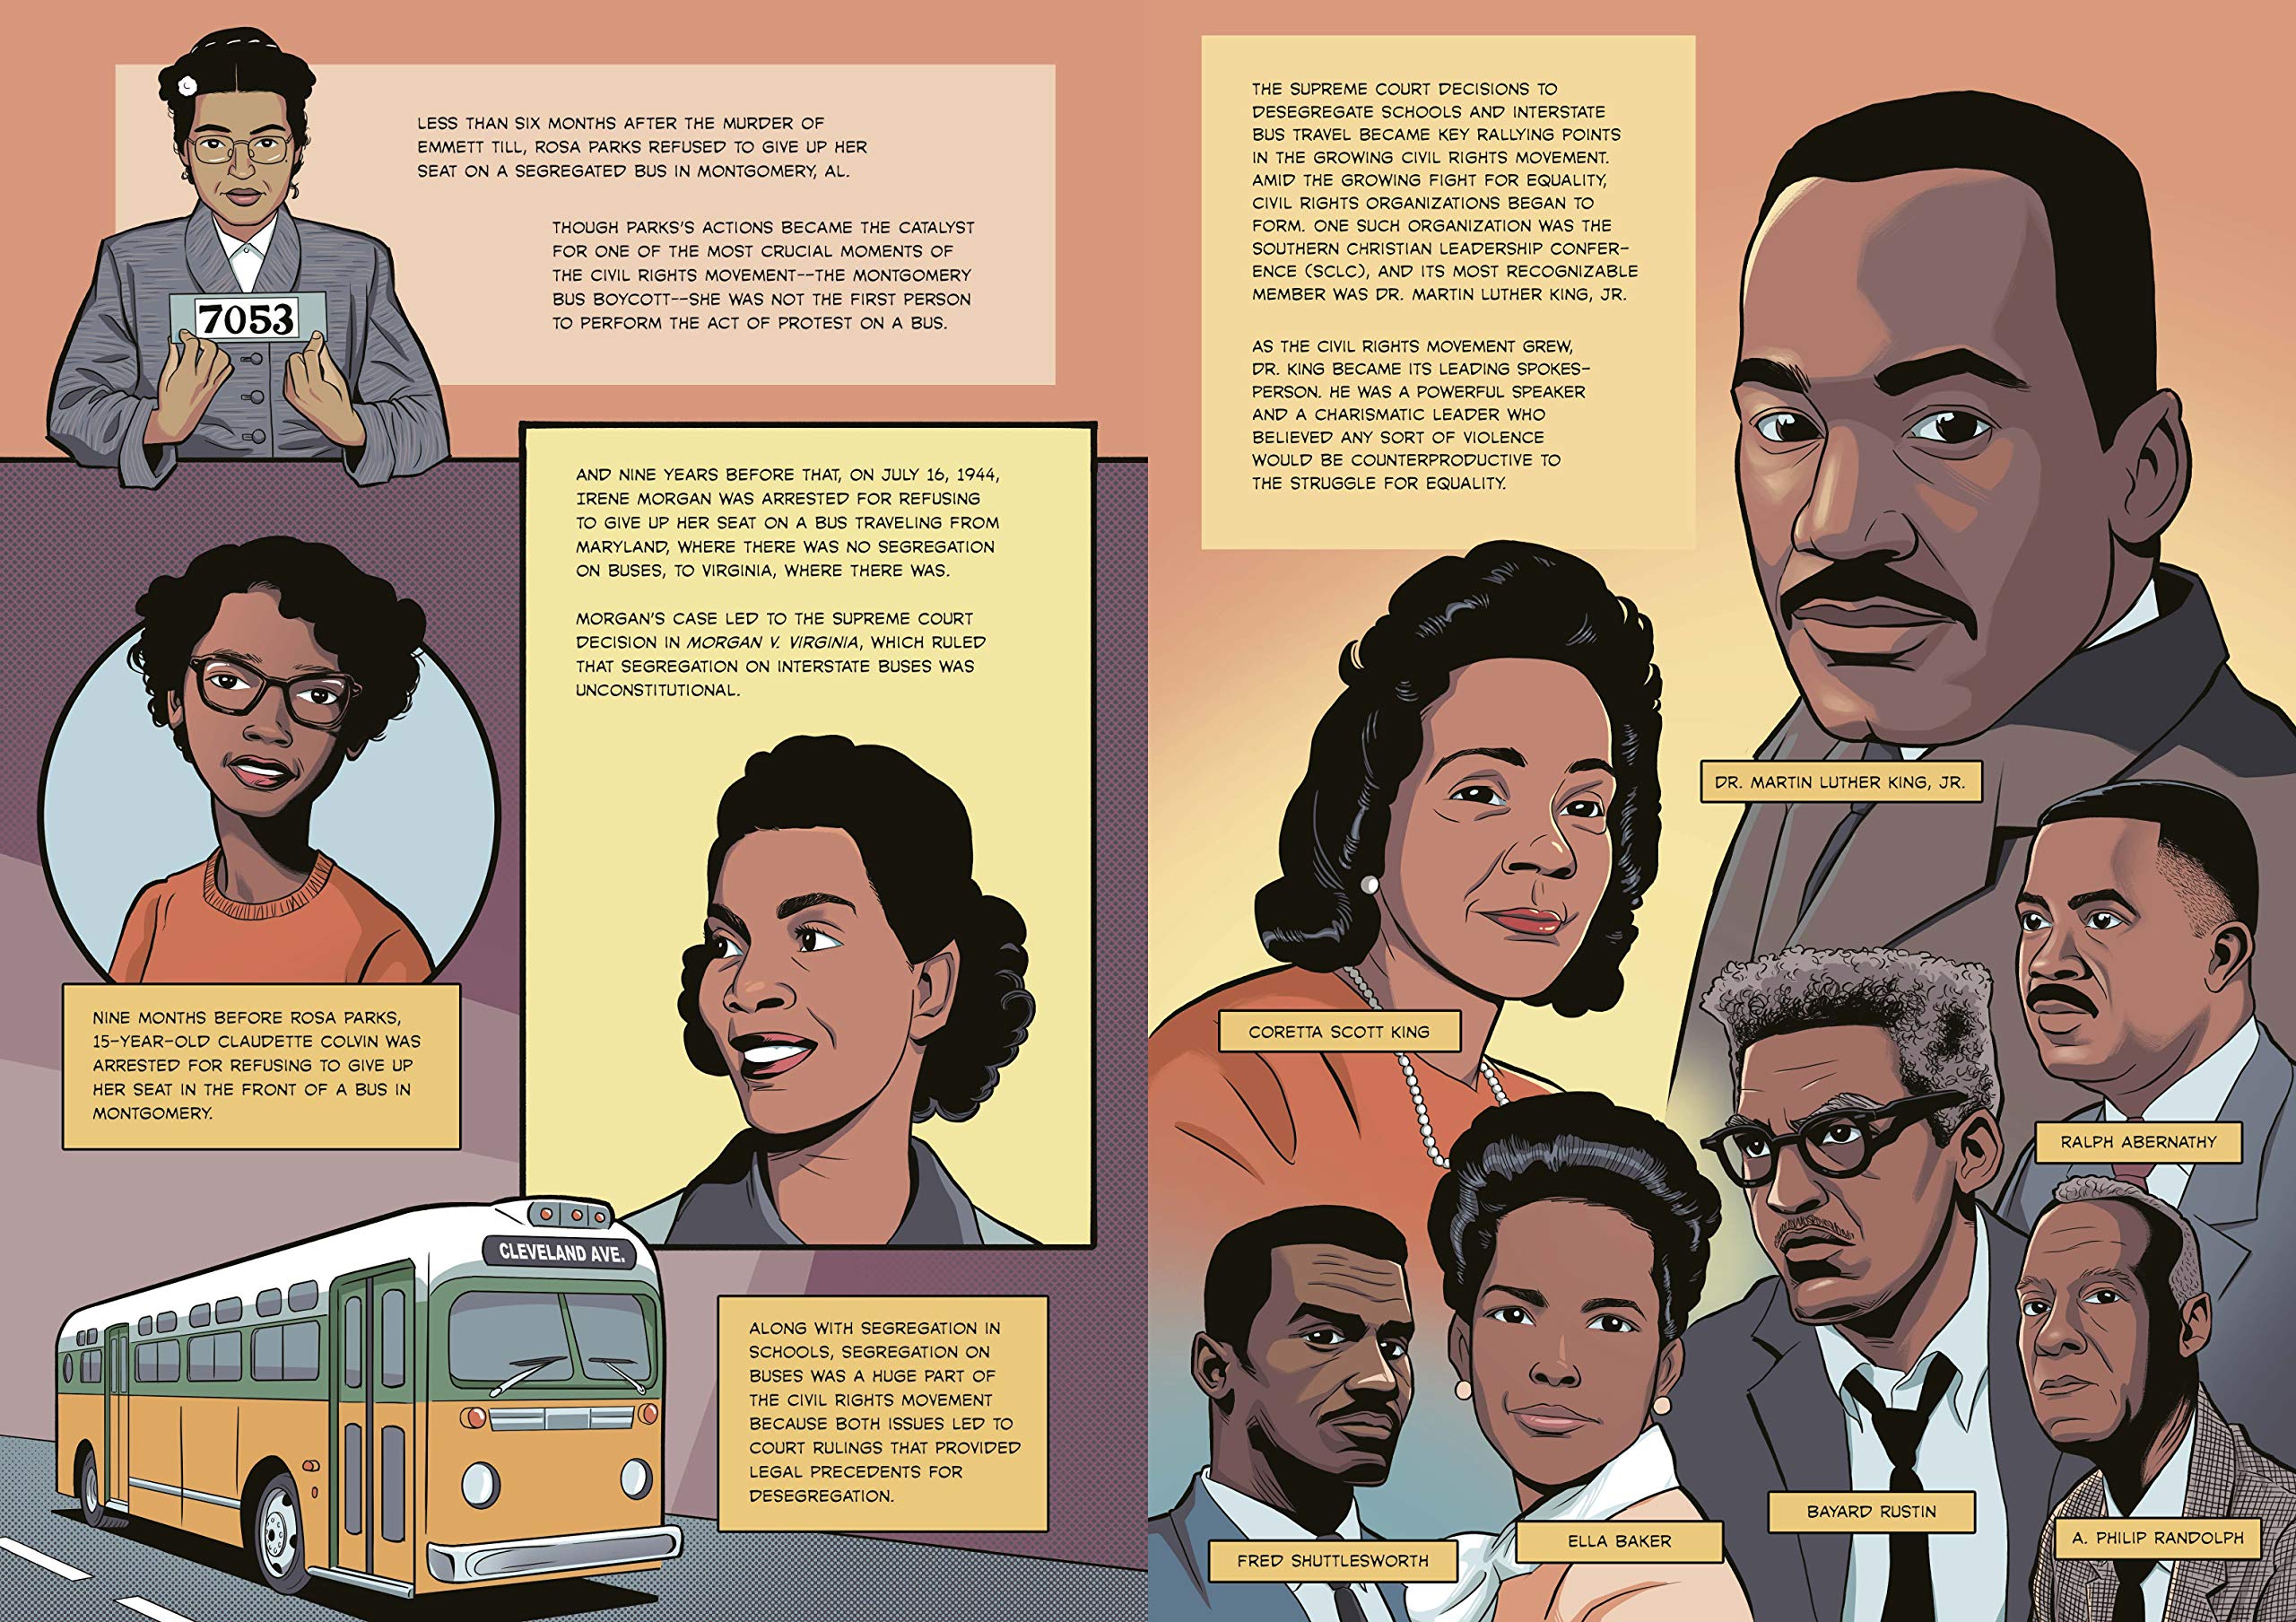 The Black Panther Party: A Graphic Novel History - David F. Walker, Marcus Kwame Anderson (Authors)